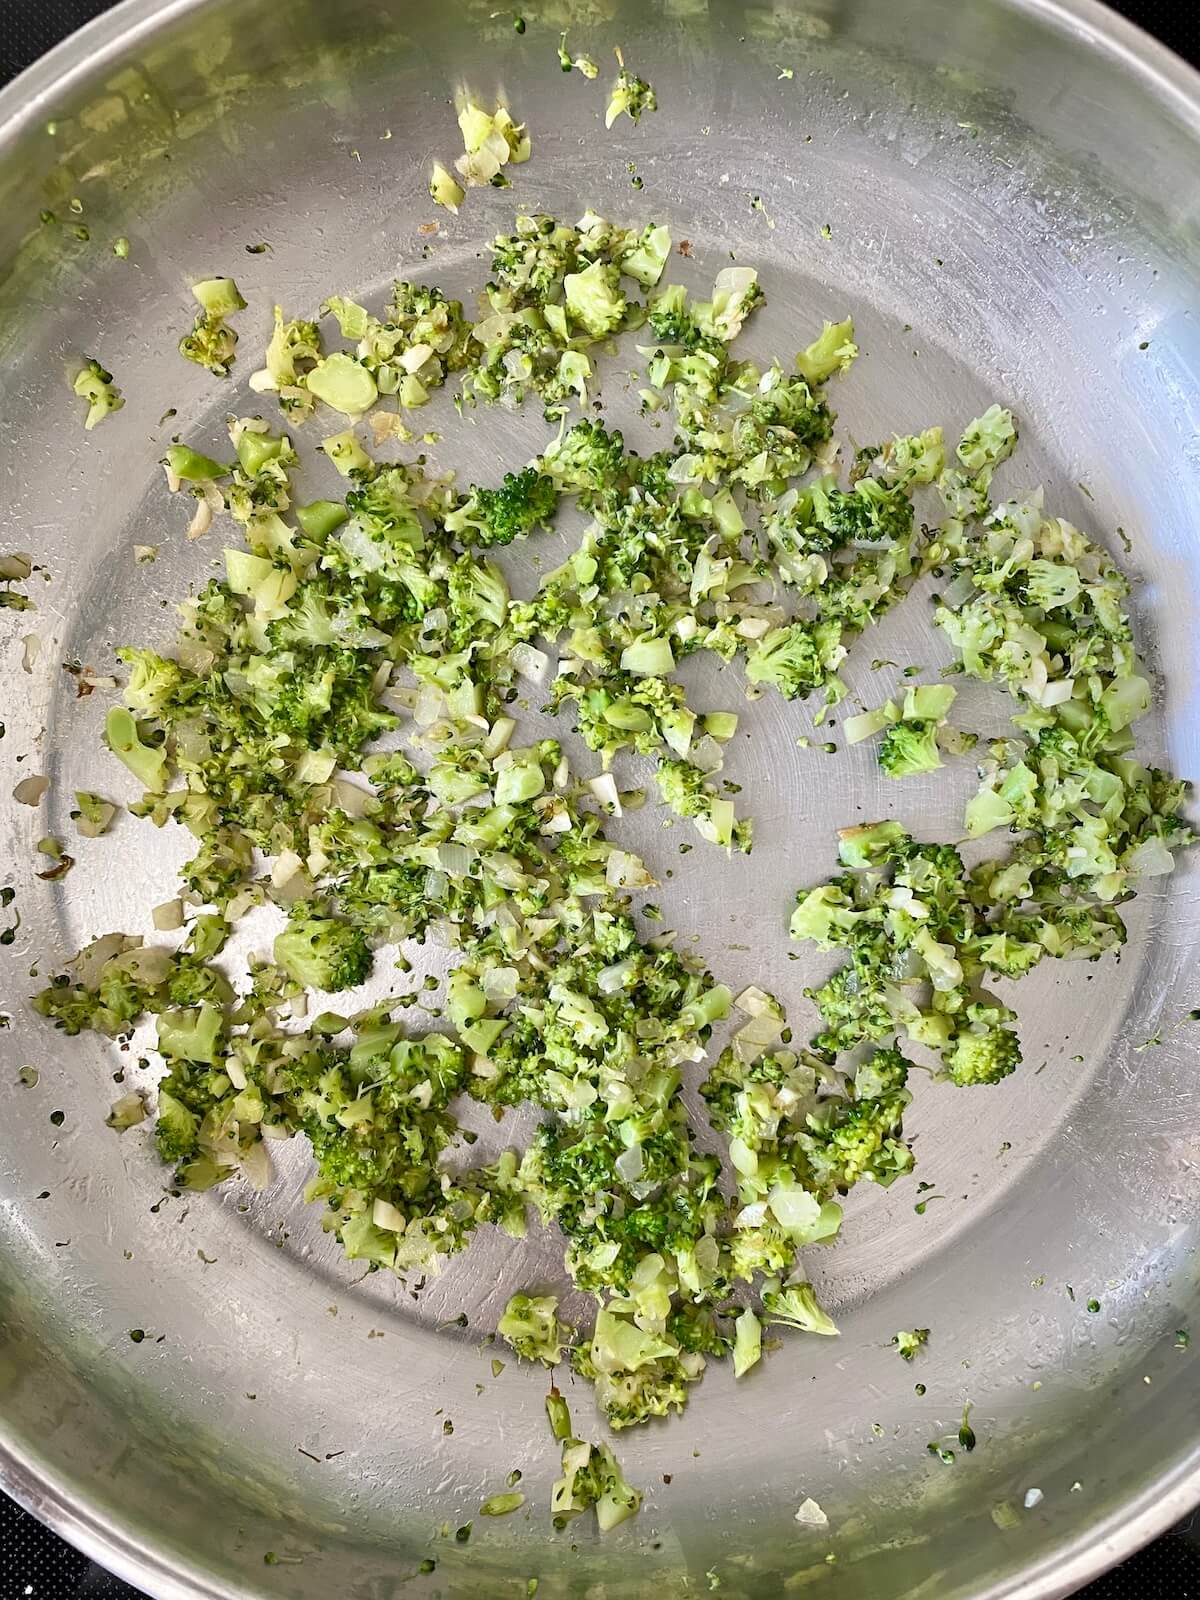 Finely chopped broccoli florets, onion, and garlic cooking in a small stainless steel pan.